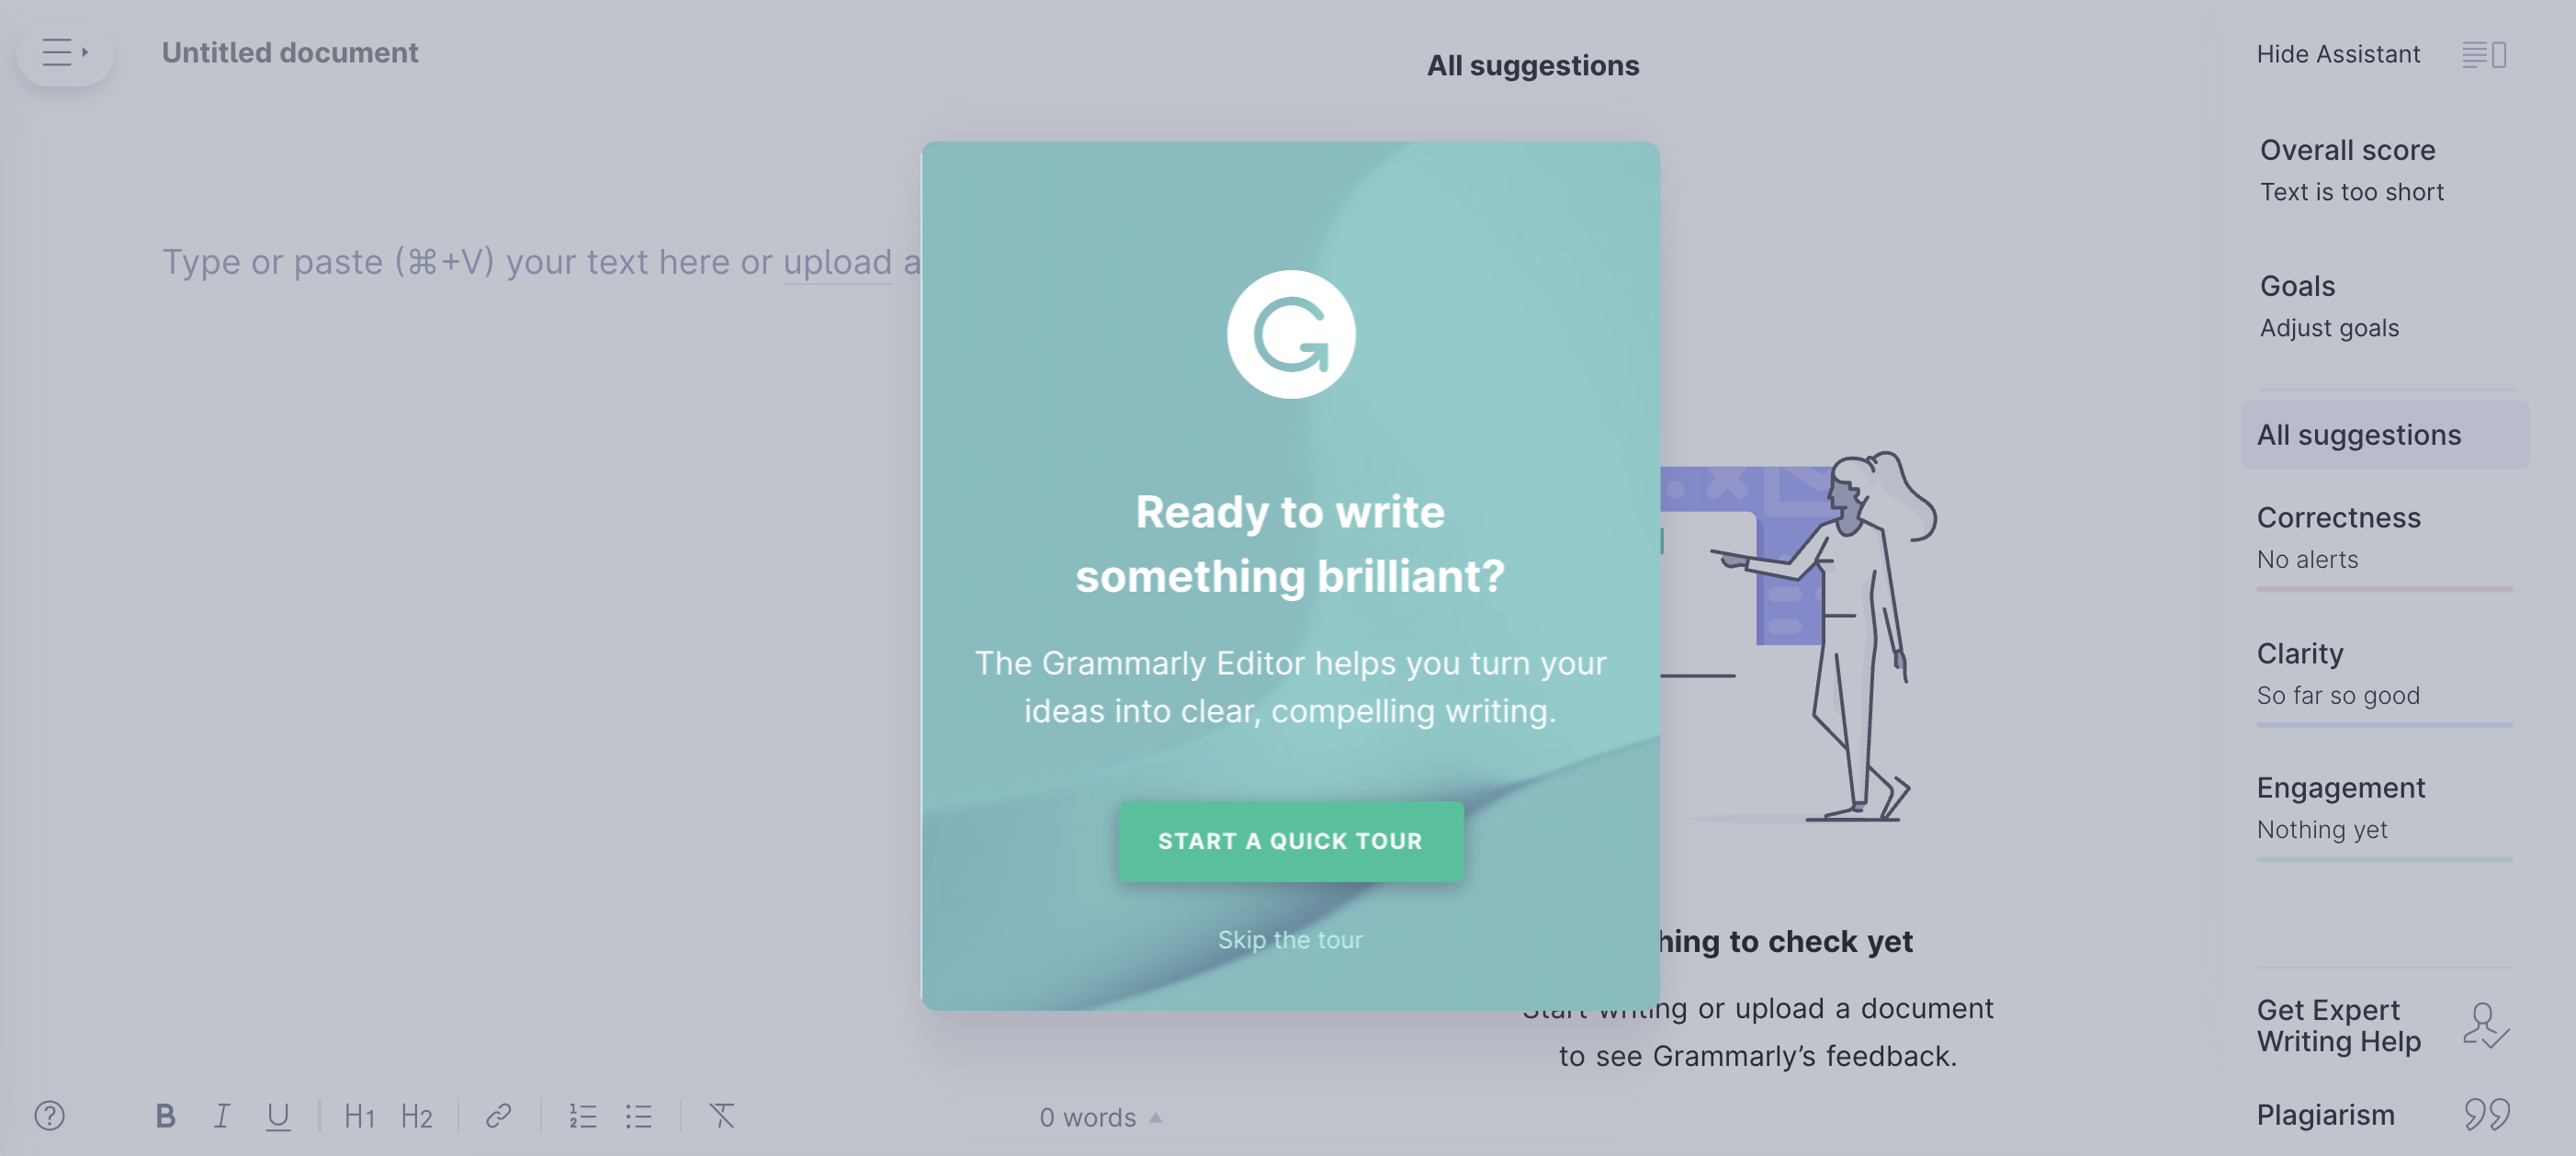 Grammarly user onboarding welcome message